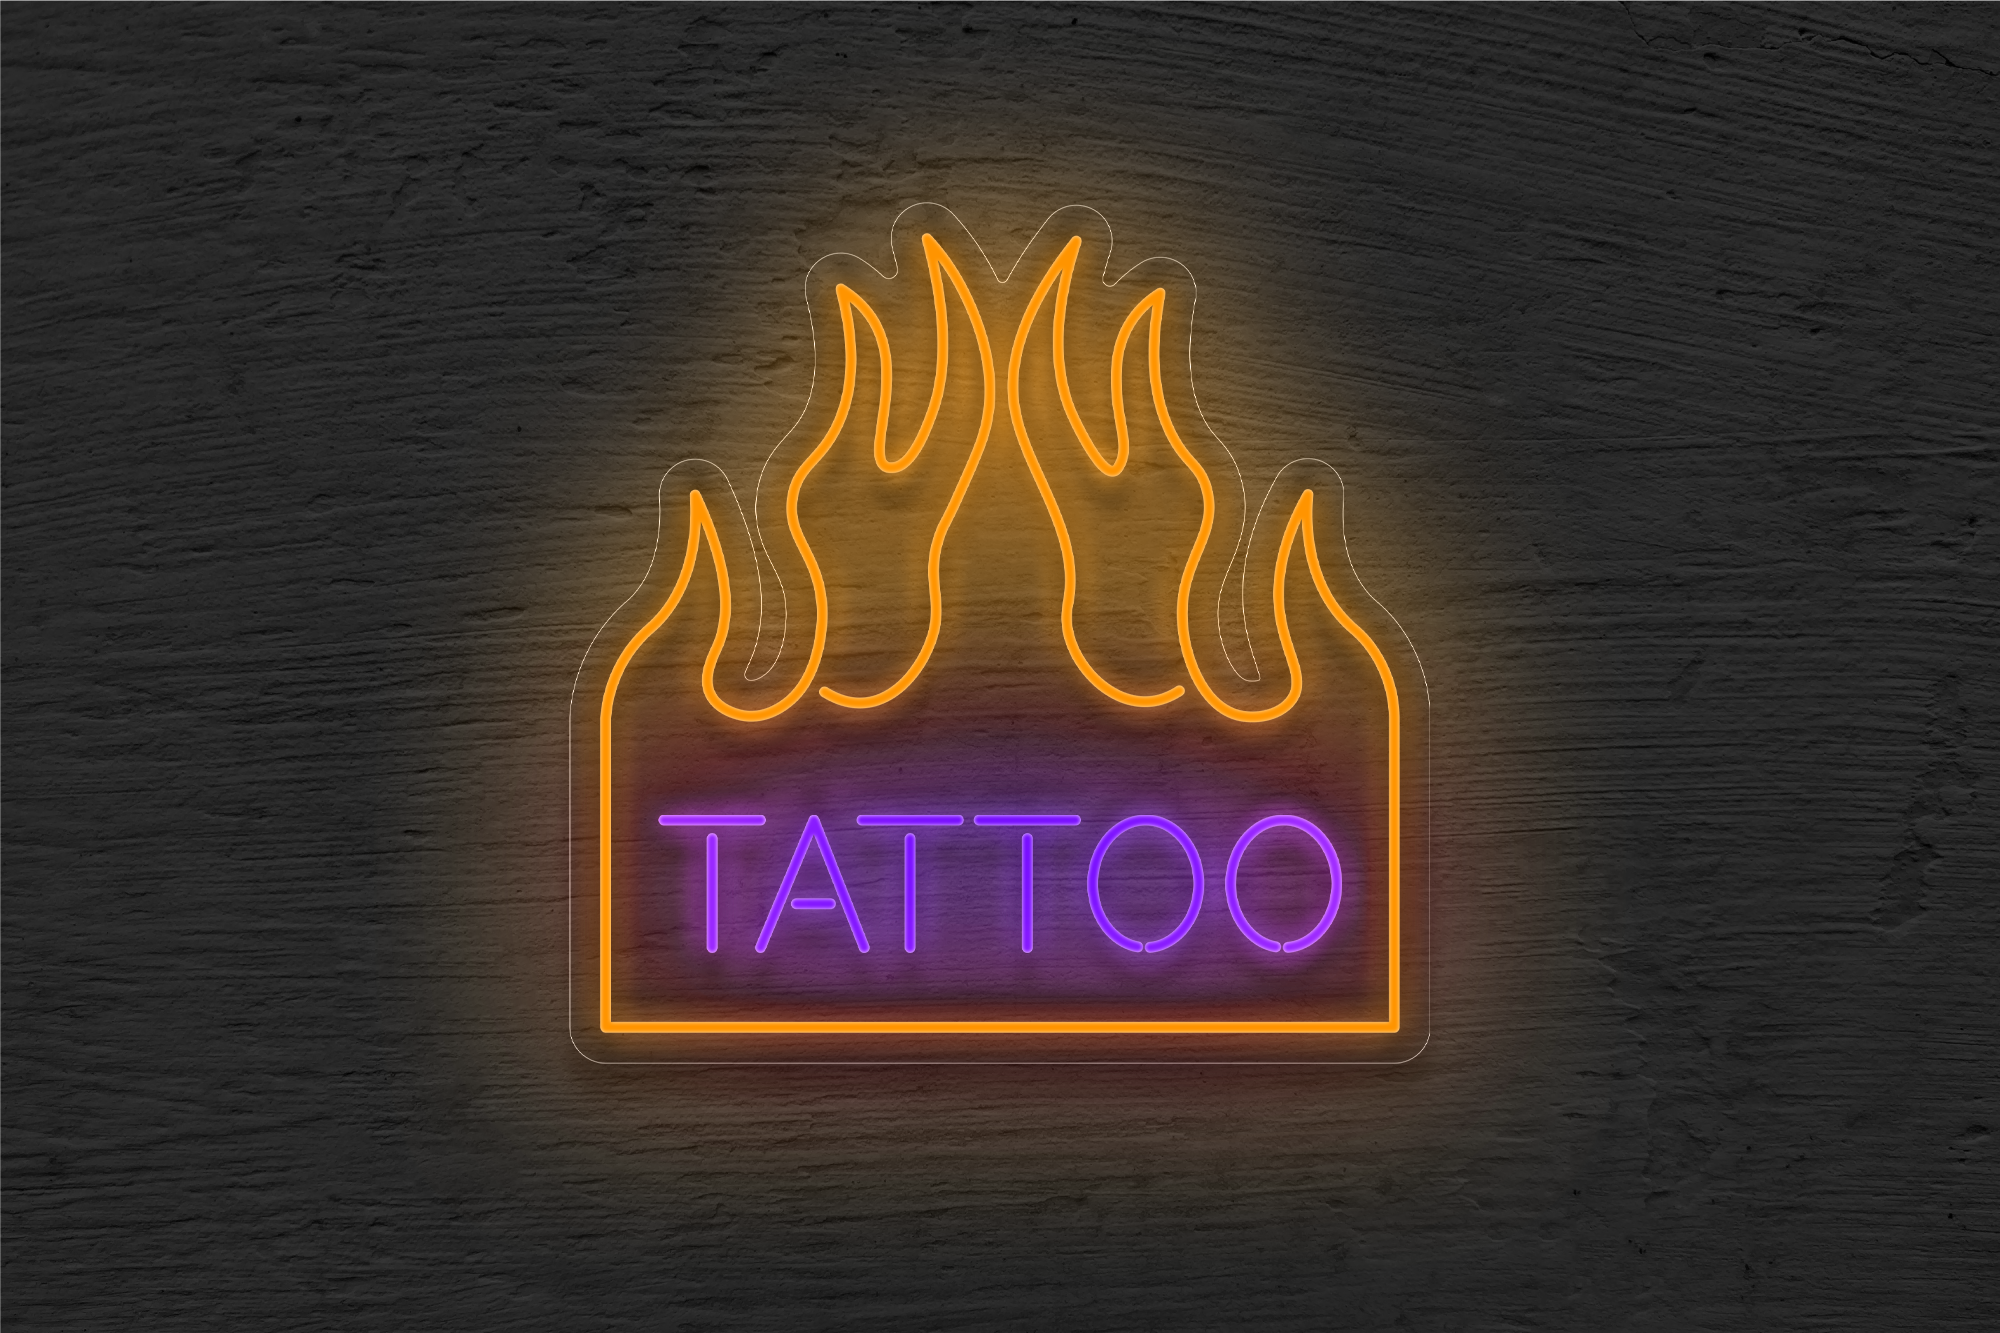 "Tattoo" with Fire Border LED Neon Sign